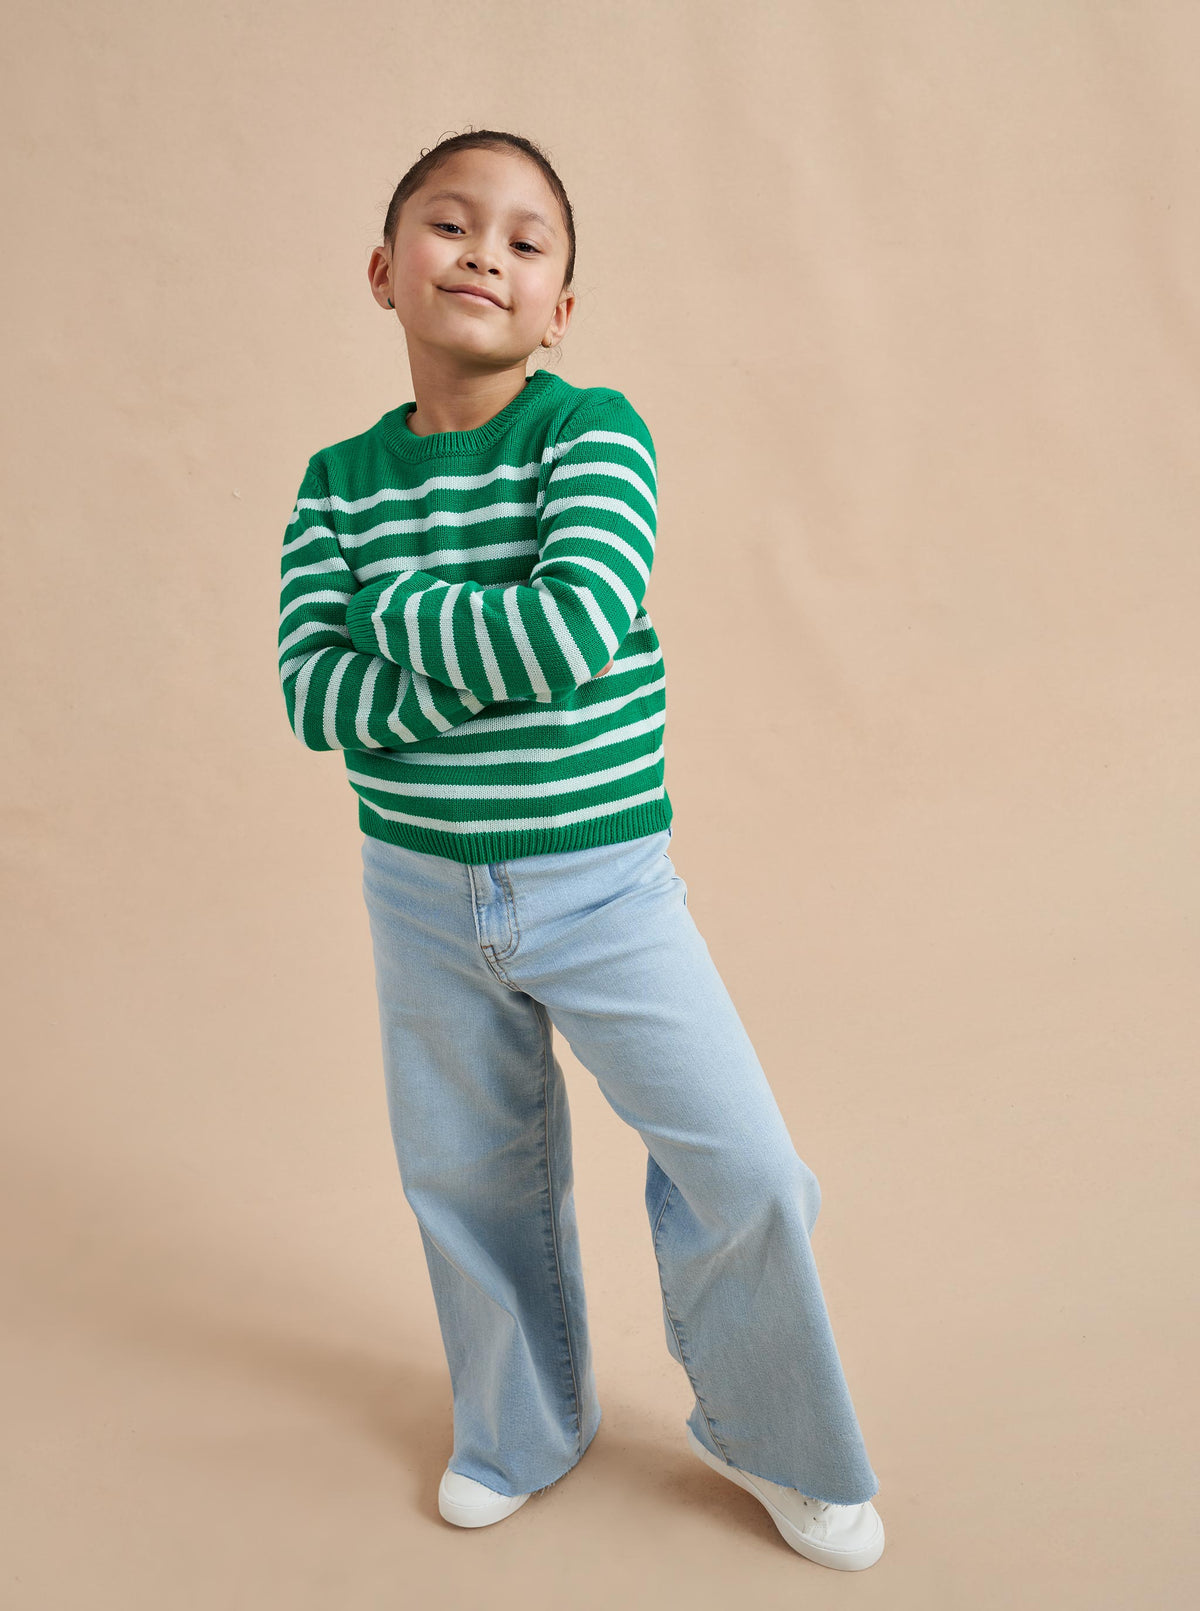 Made especially for our littlest (and mightiest) generation, our Marini Sweater is a shrunken down version of our best-selling adult Marin Sweater, now available for kids. We swapped our signature wool/cashmere blend to 100% cotton for kid’s comfort and ease so the only cycle you need to remember is throw on, throw off, laundry, repeat.